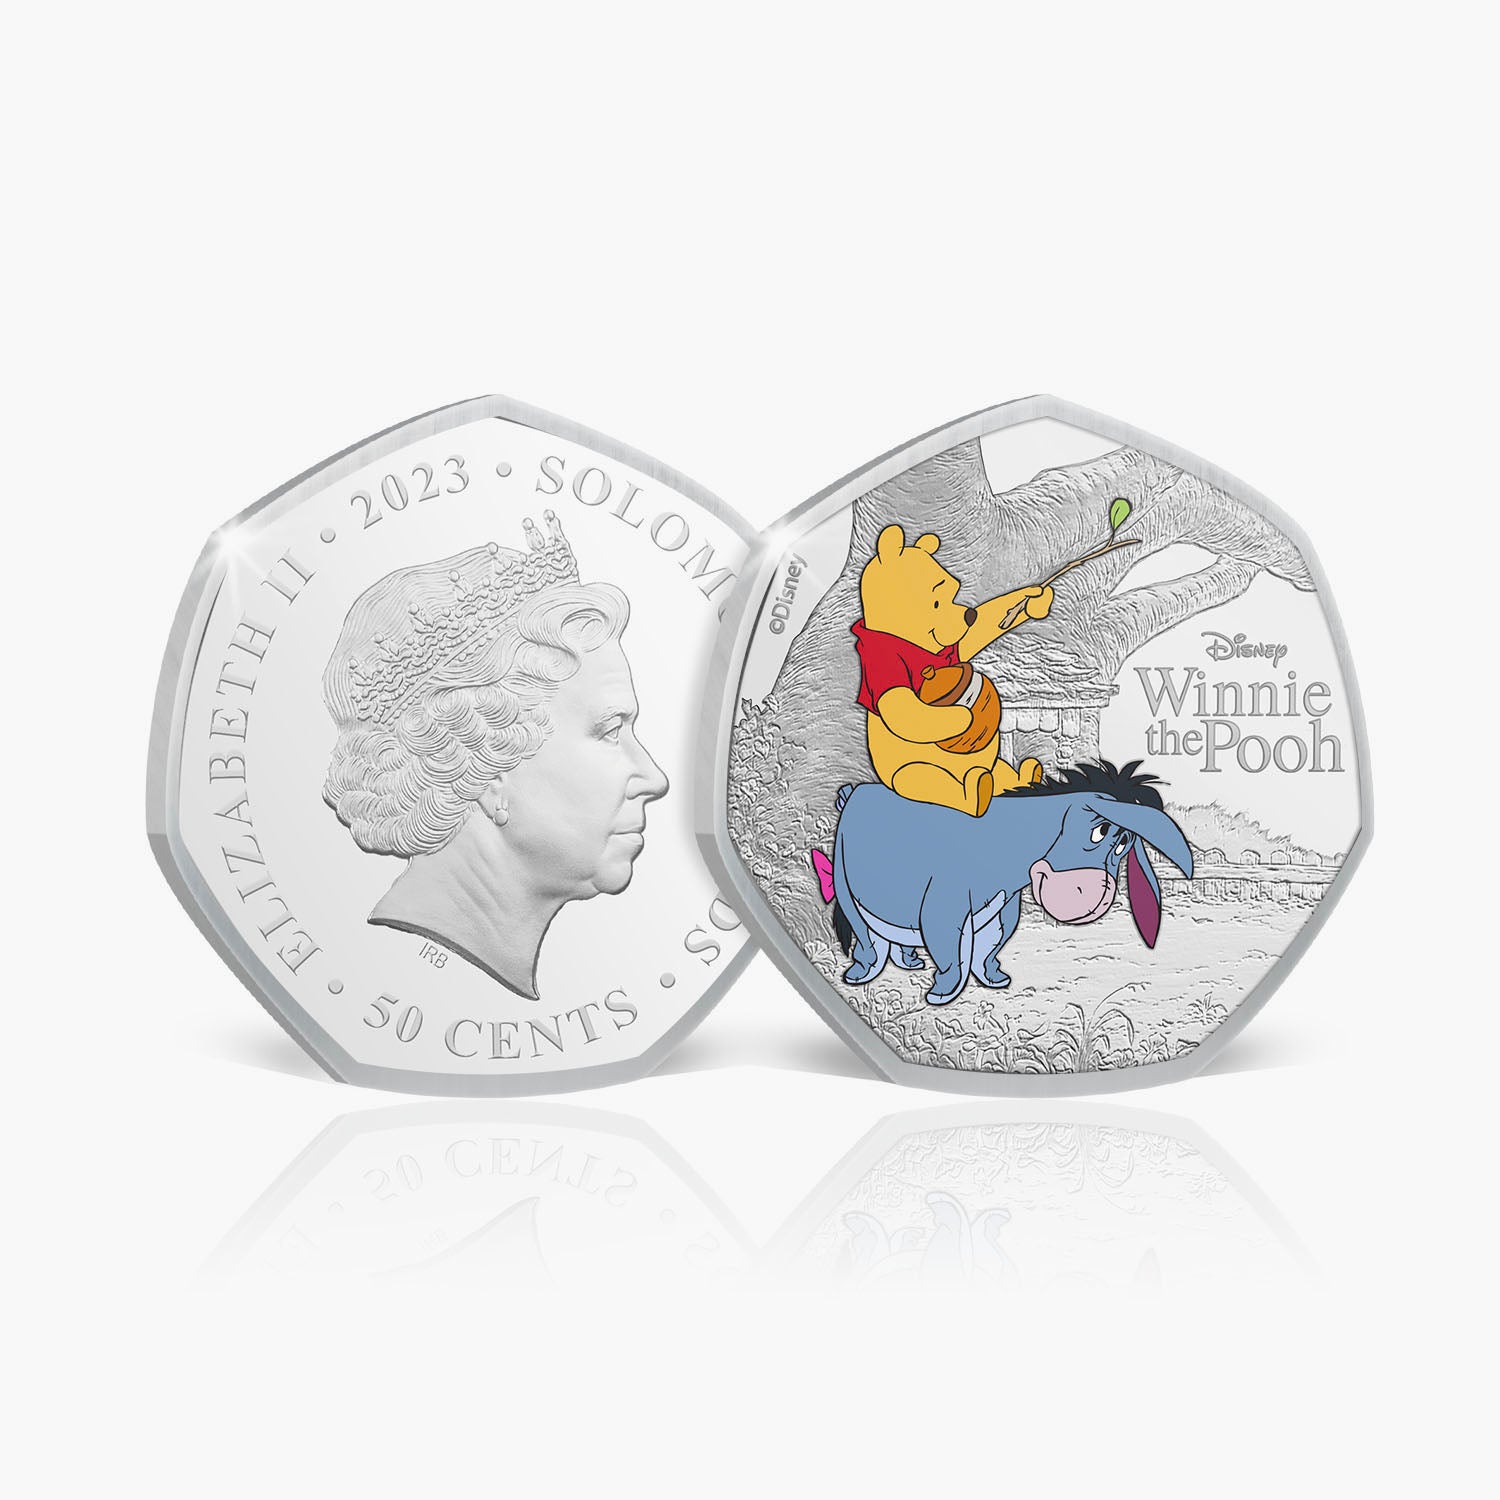 The Winnie the Pooh 2023 Eeyore and Winnie the Pooh Coin